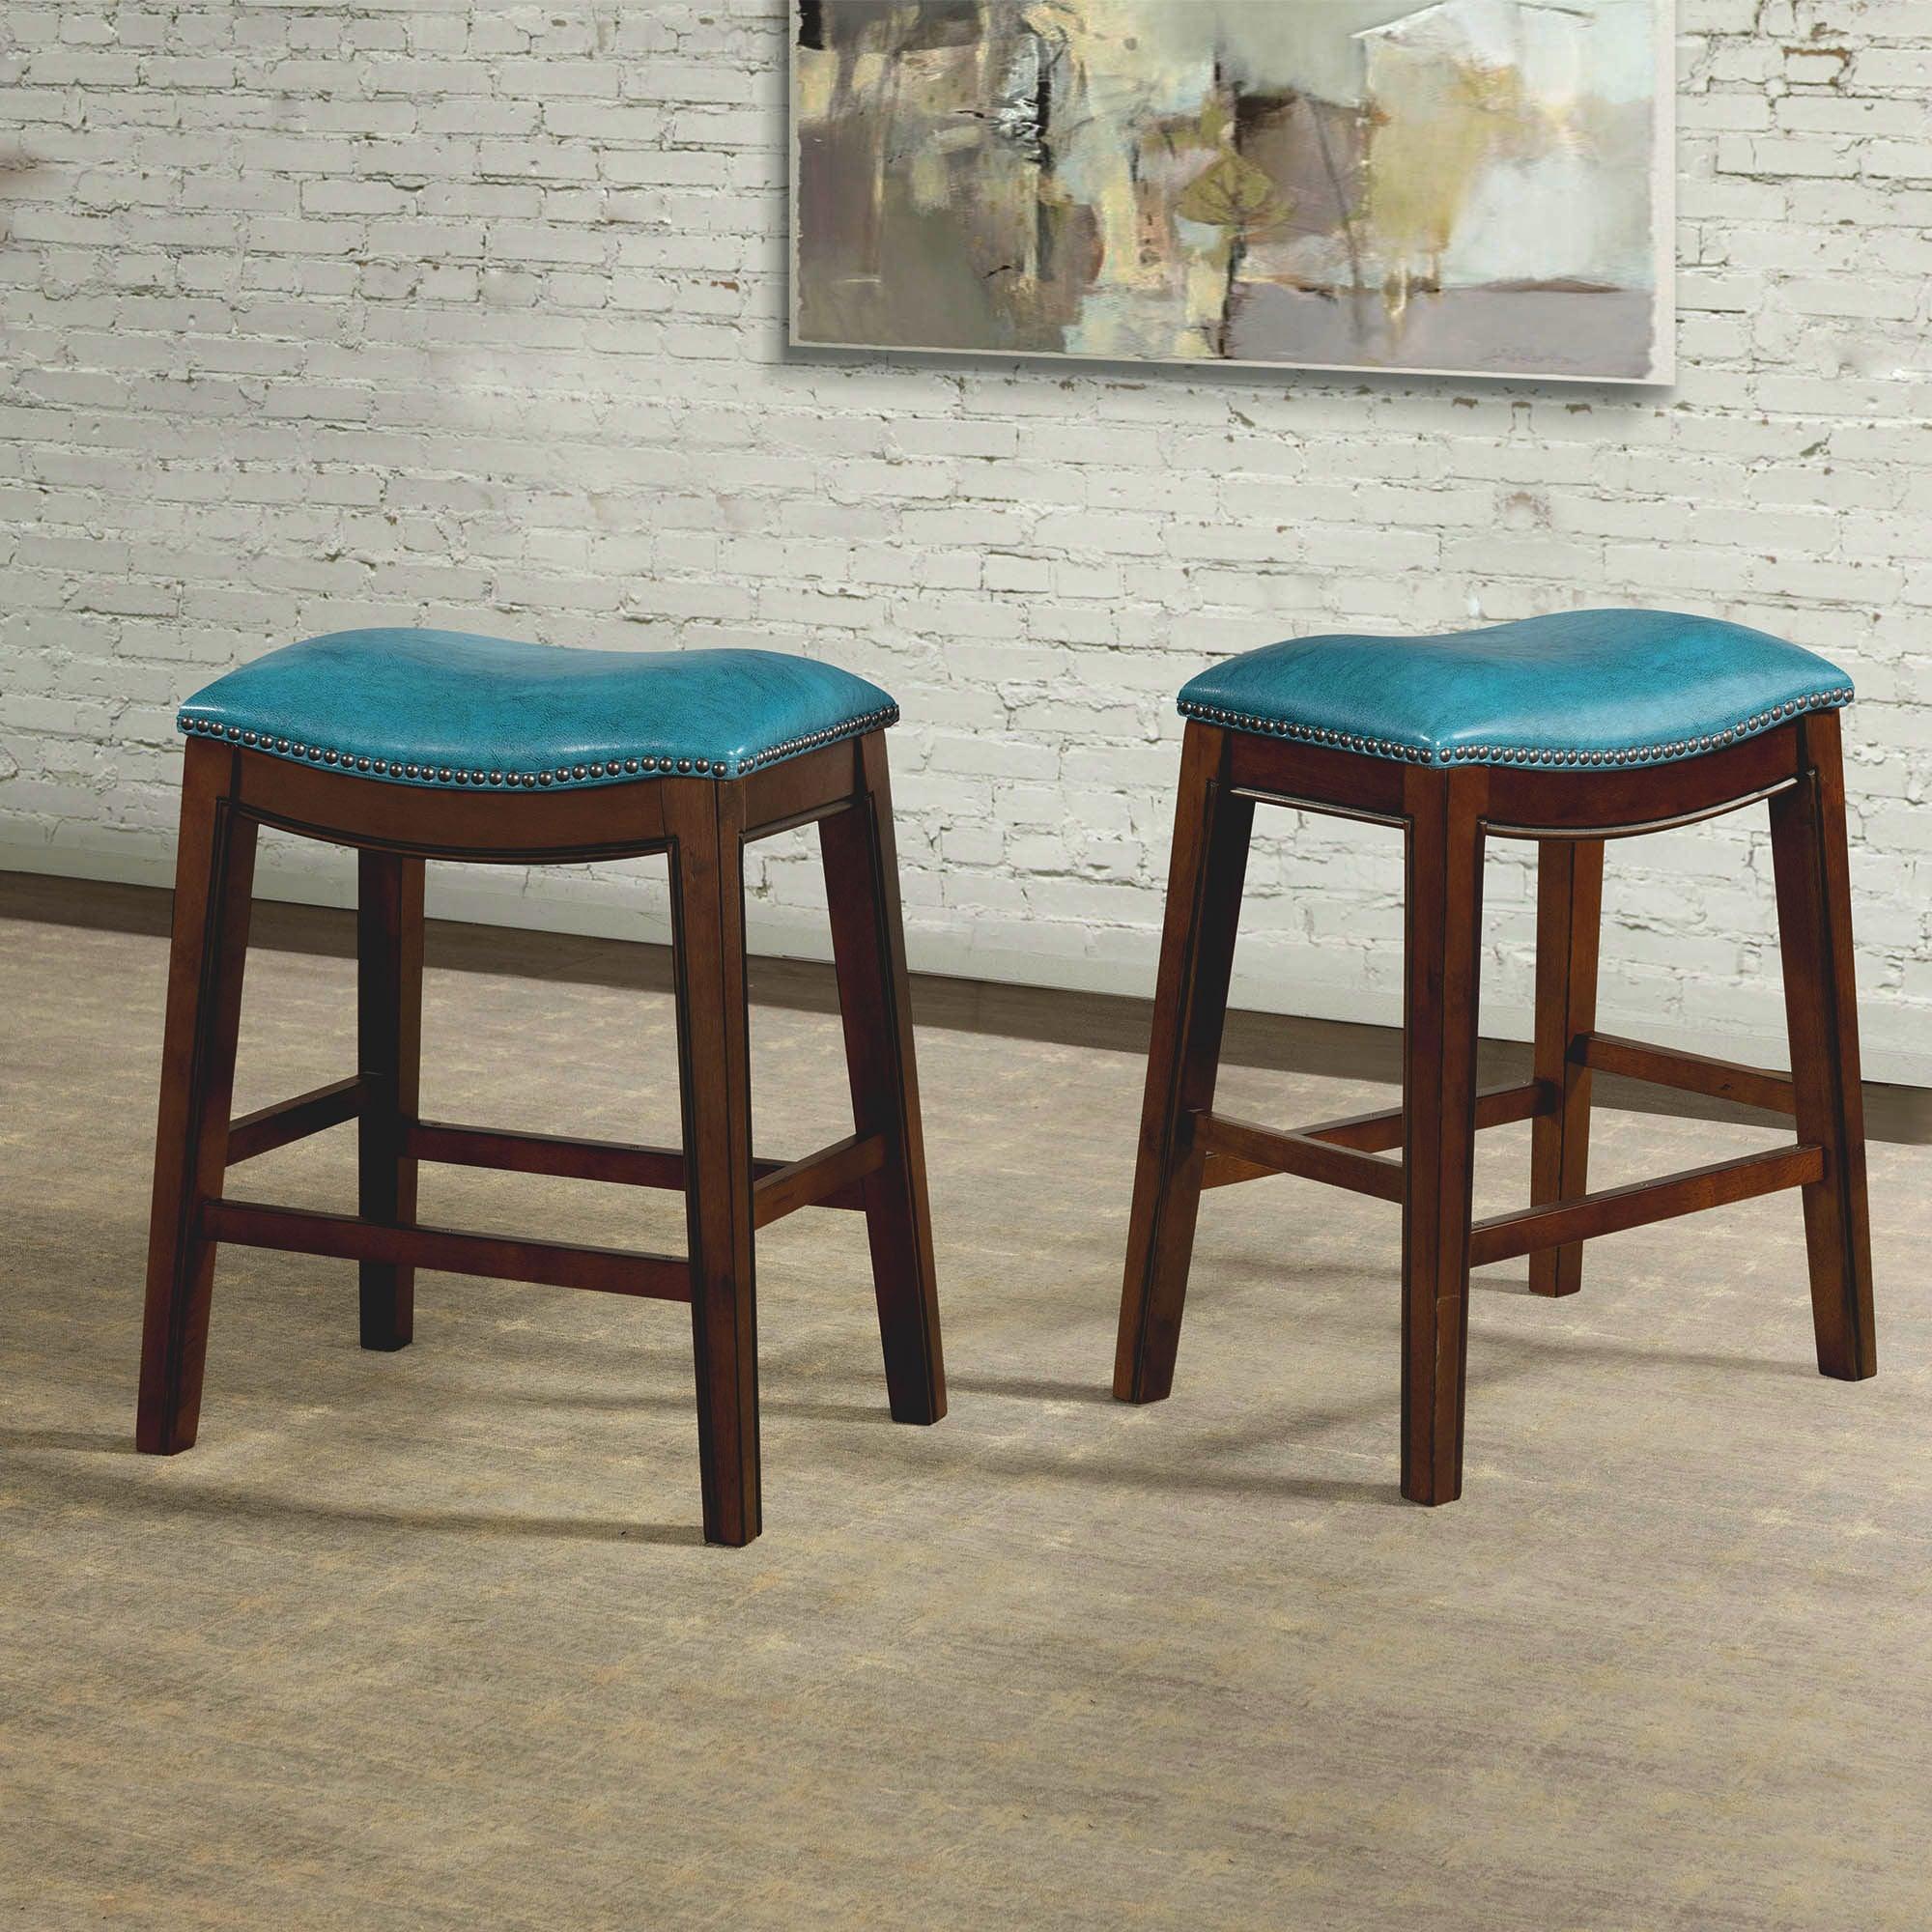 Elements Barstools - Bowen 24" Backless Counter Height Stool in Blue